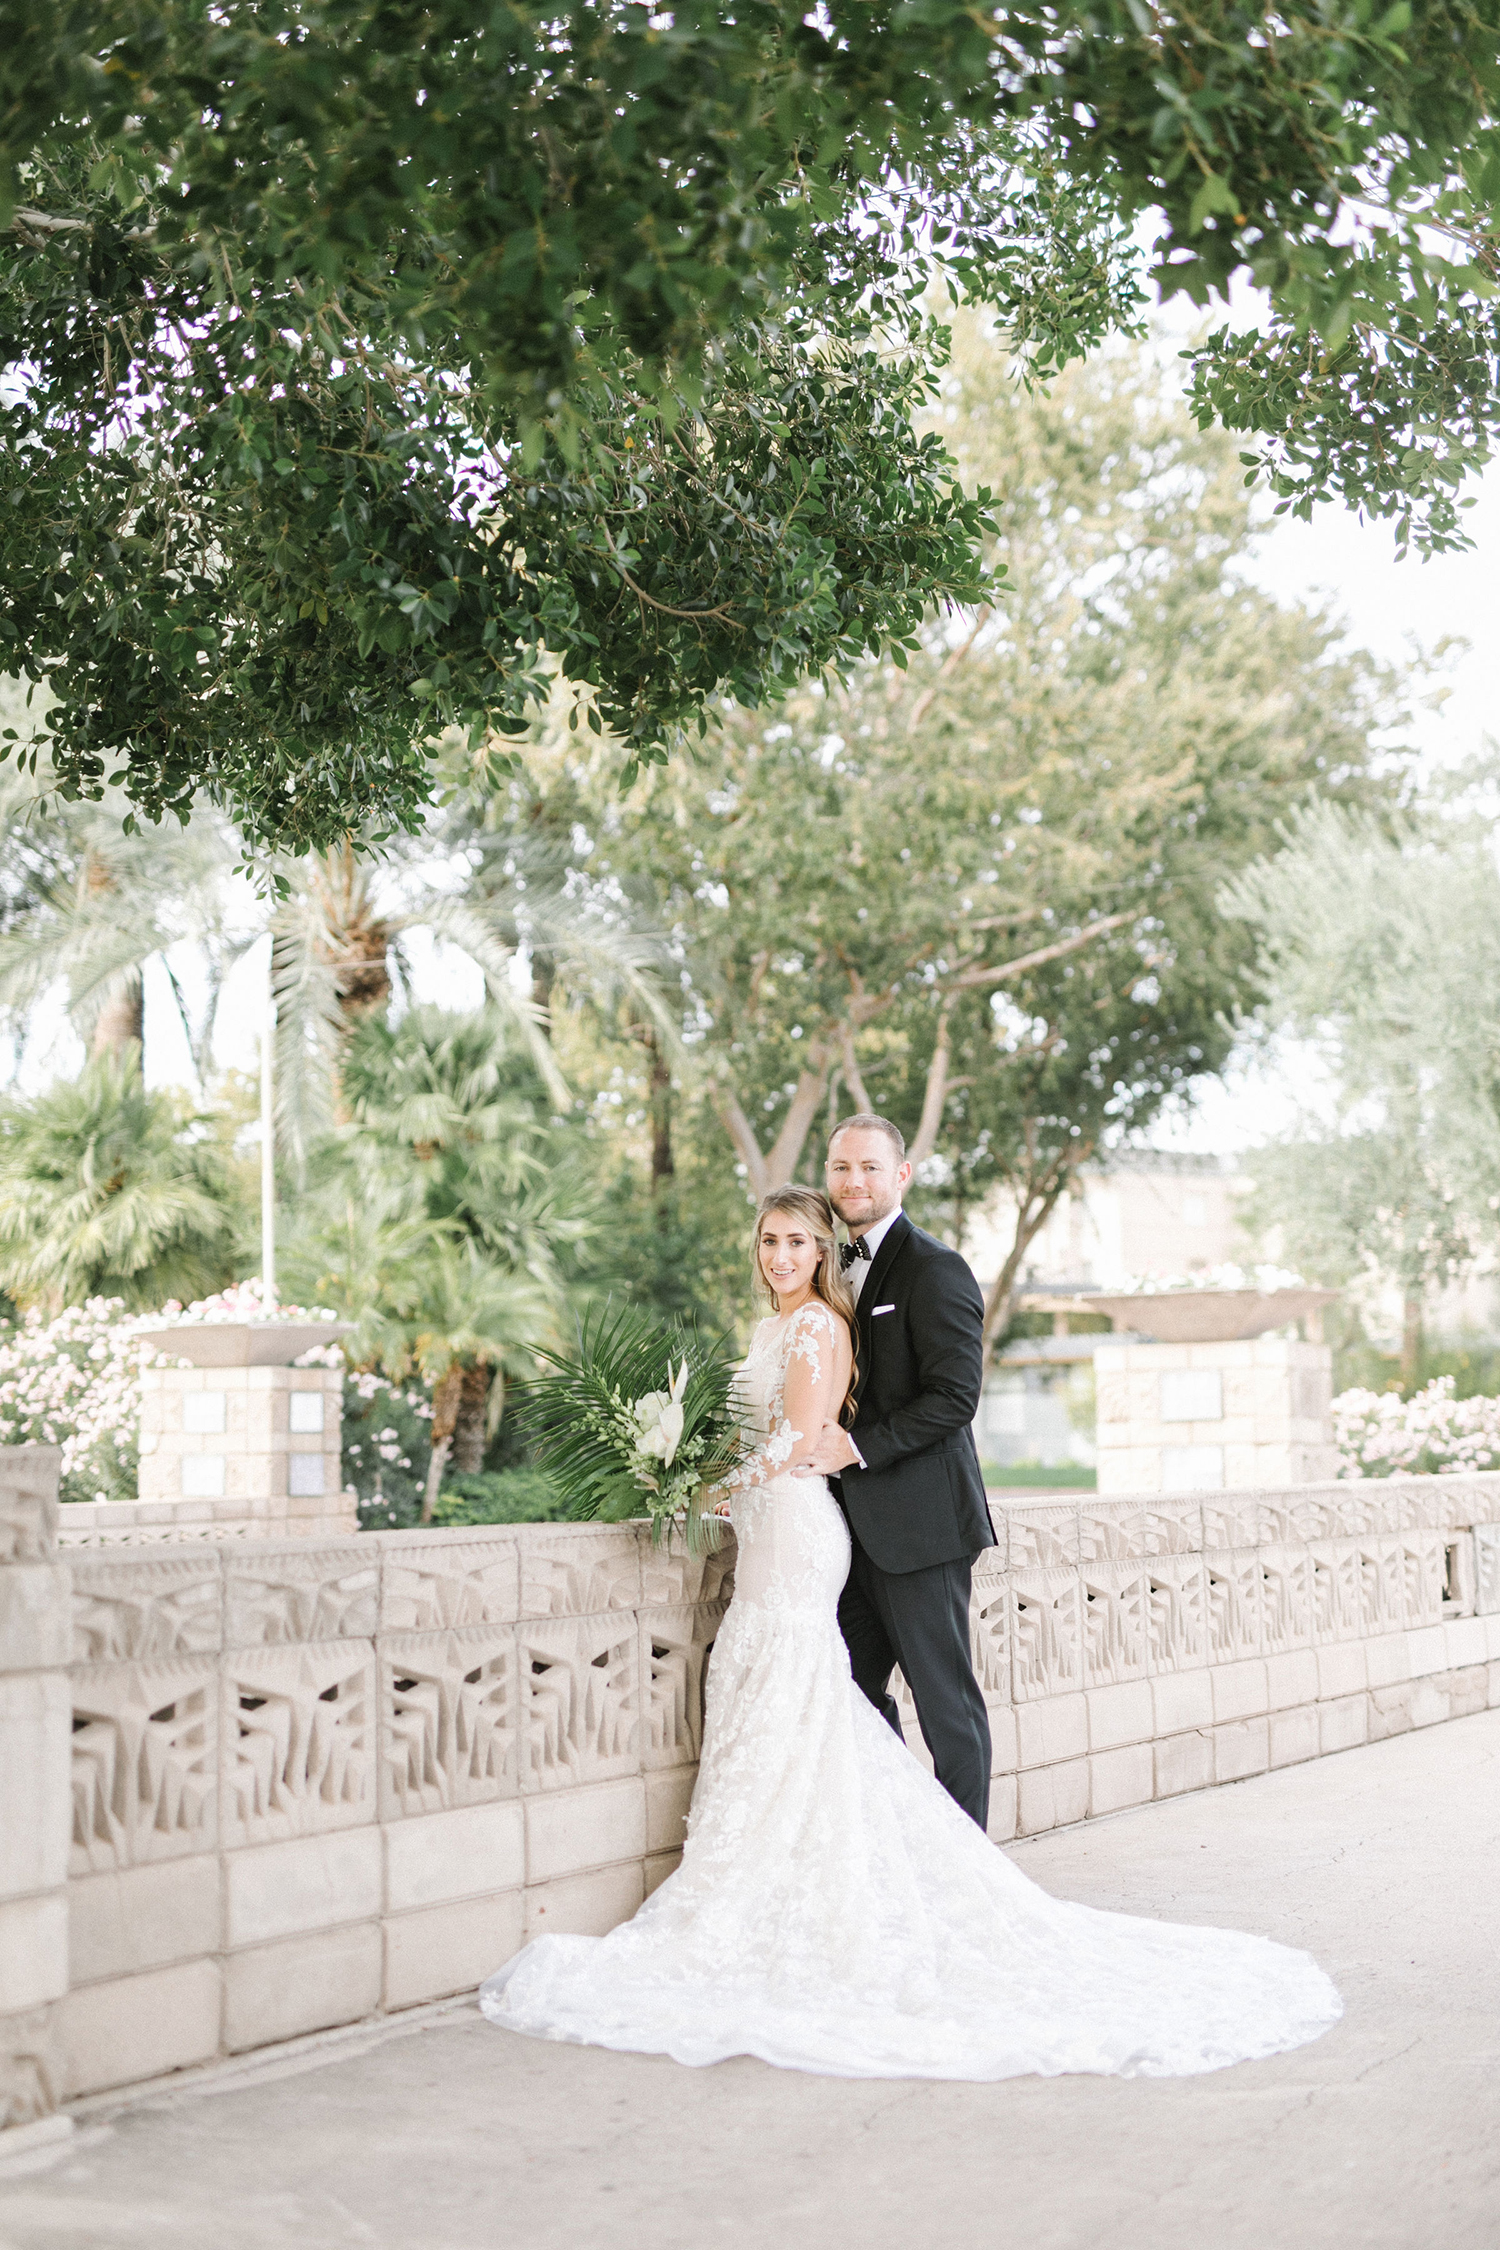 Jen and Will's stunning Arizona wedding at The Arizona Biltmore. Planning by Andrea Leslie, florals by Form Floral, bride's dress is Galia Lahav, hair by Chelsea Sprinkle, makeup by Ashley Doran, wedding stationary by Idieh Design, linens by Latavola Linen, and entertainment by Lucky Devils Band. Catch it all now on the blog! #ArizonaWeddingPhotographer #WeddingPhotographyInspiration #WeddingStylingIdeas #ArizonaWeddingIdeas #ArizonaWeddingPhotography #WeddingIdeas #WeddingDecorations #WeddingDress #ArizonaWedding #ArizonaPhotographer #ArizonaBiltmore